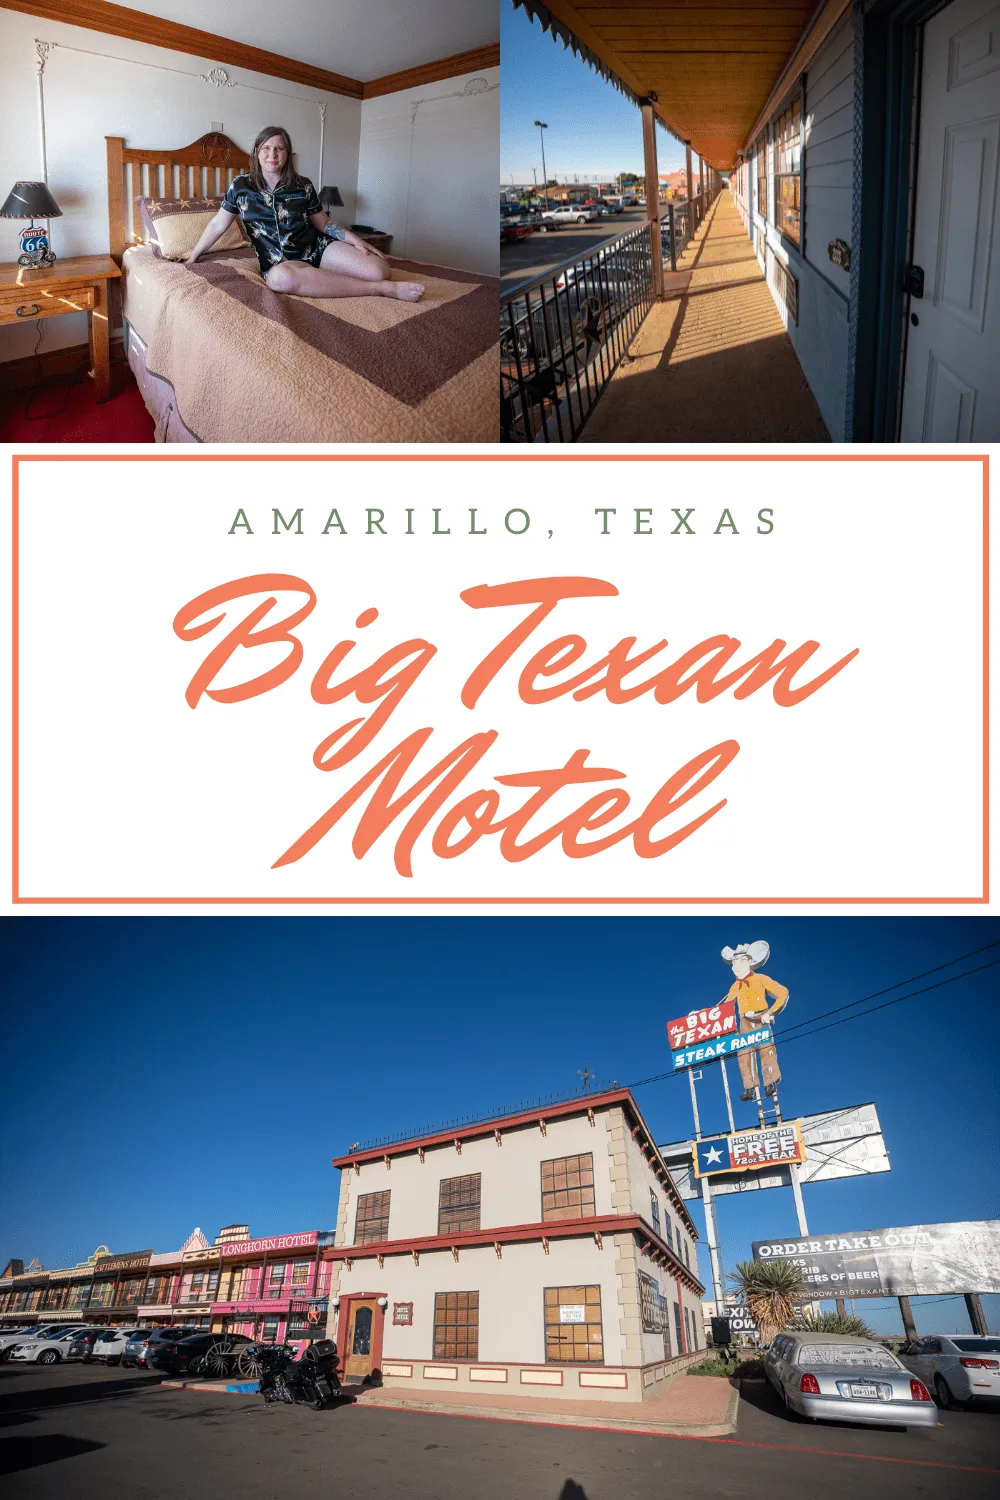 In a food coma after polishing off a 72-ounce steak challenge at the Big Texan Steakhouse? Need to sleep it off? I know just the place. If you're looking for unique accommodation on Route 66 look no further than the Big Texan Motel in Amarillo, Texas. Stay next to the famous steakhouse on your Route 66 road trip.  #RoadTrips #RoadTripStop #Route66 #Route66RoadTrip #TexasRoute66 #Texas #TexasRoadTrip #TexasRoadsideAttractions #RoadsideAttractions #RoadsideAttraction #RoadsideAmerica #RoadTrip